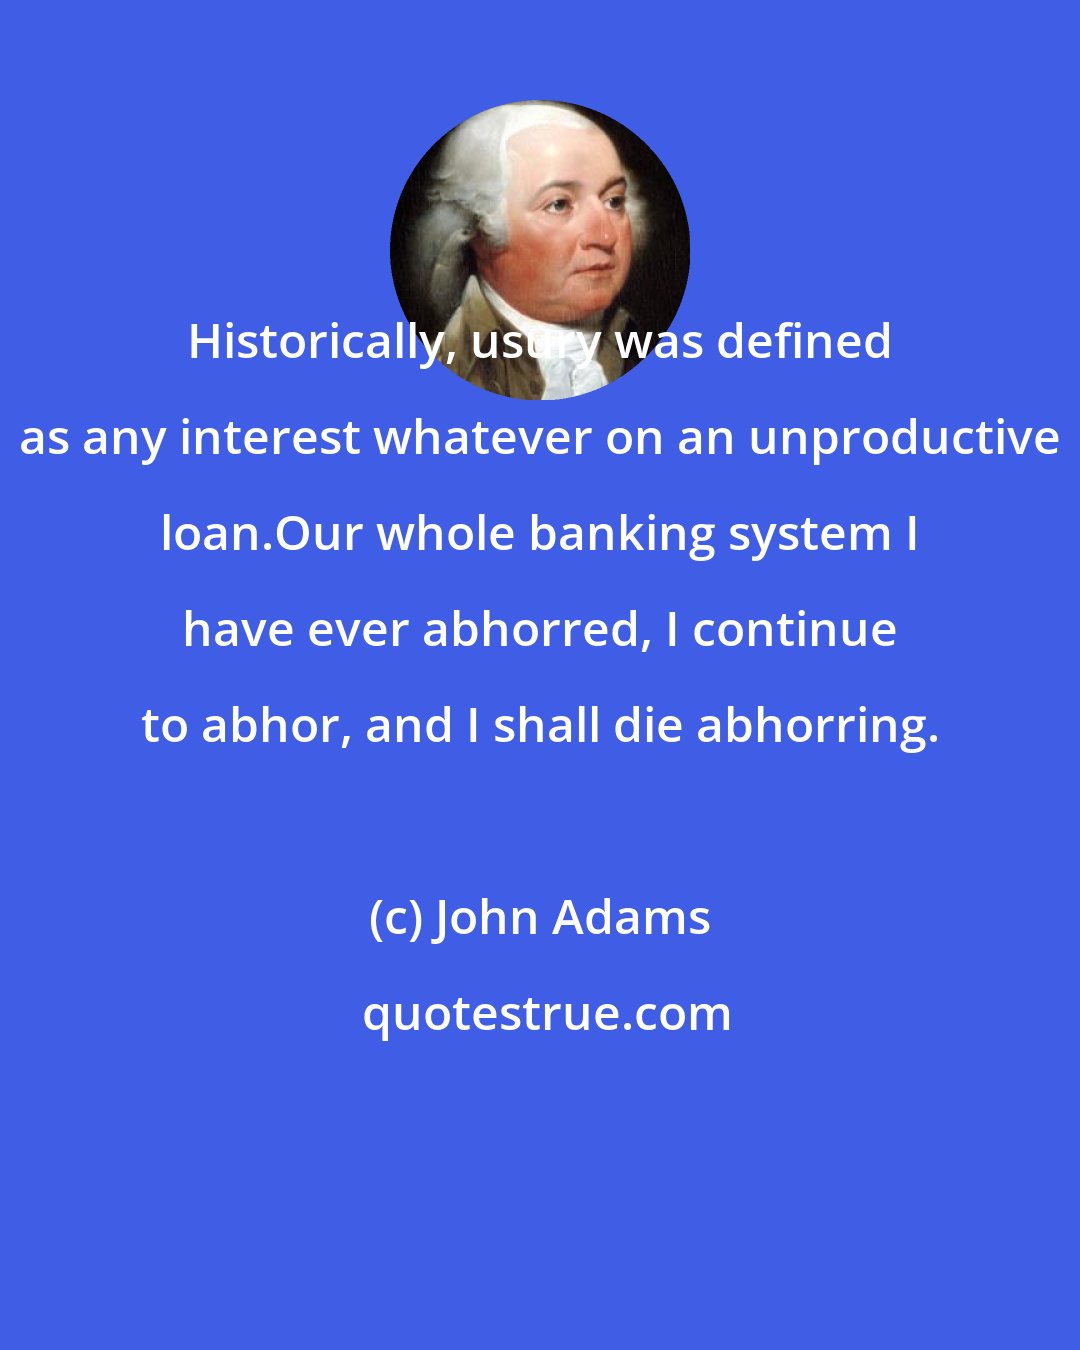 John Adams: Historically, usury was defined as any interest whatever on an unproductive loan.Our whole banking system I have ever abhorred, I continue to abhor, and I shall die abhorring.